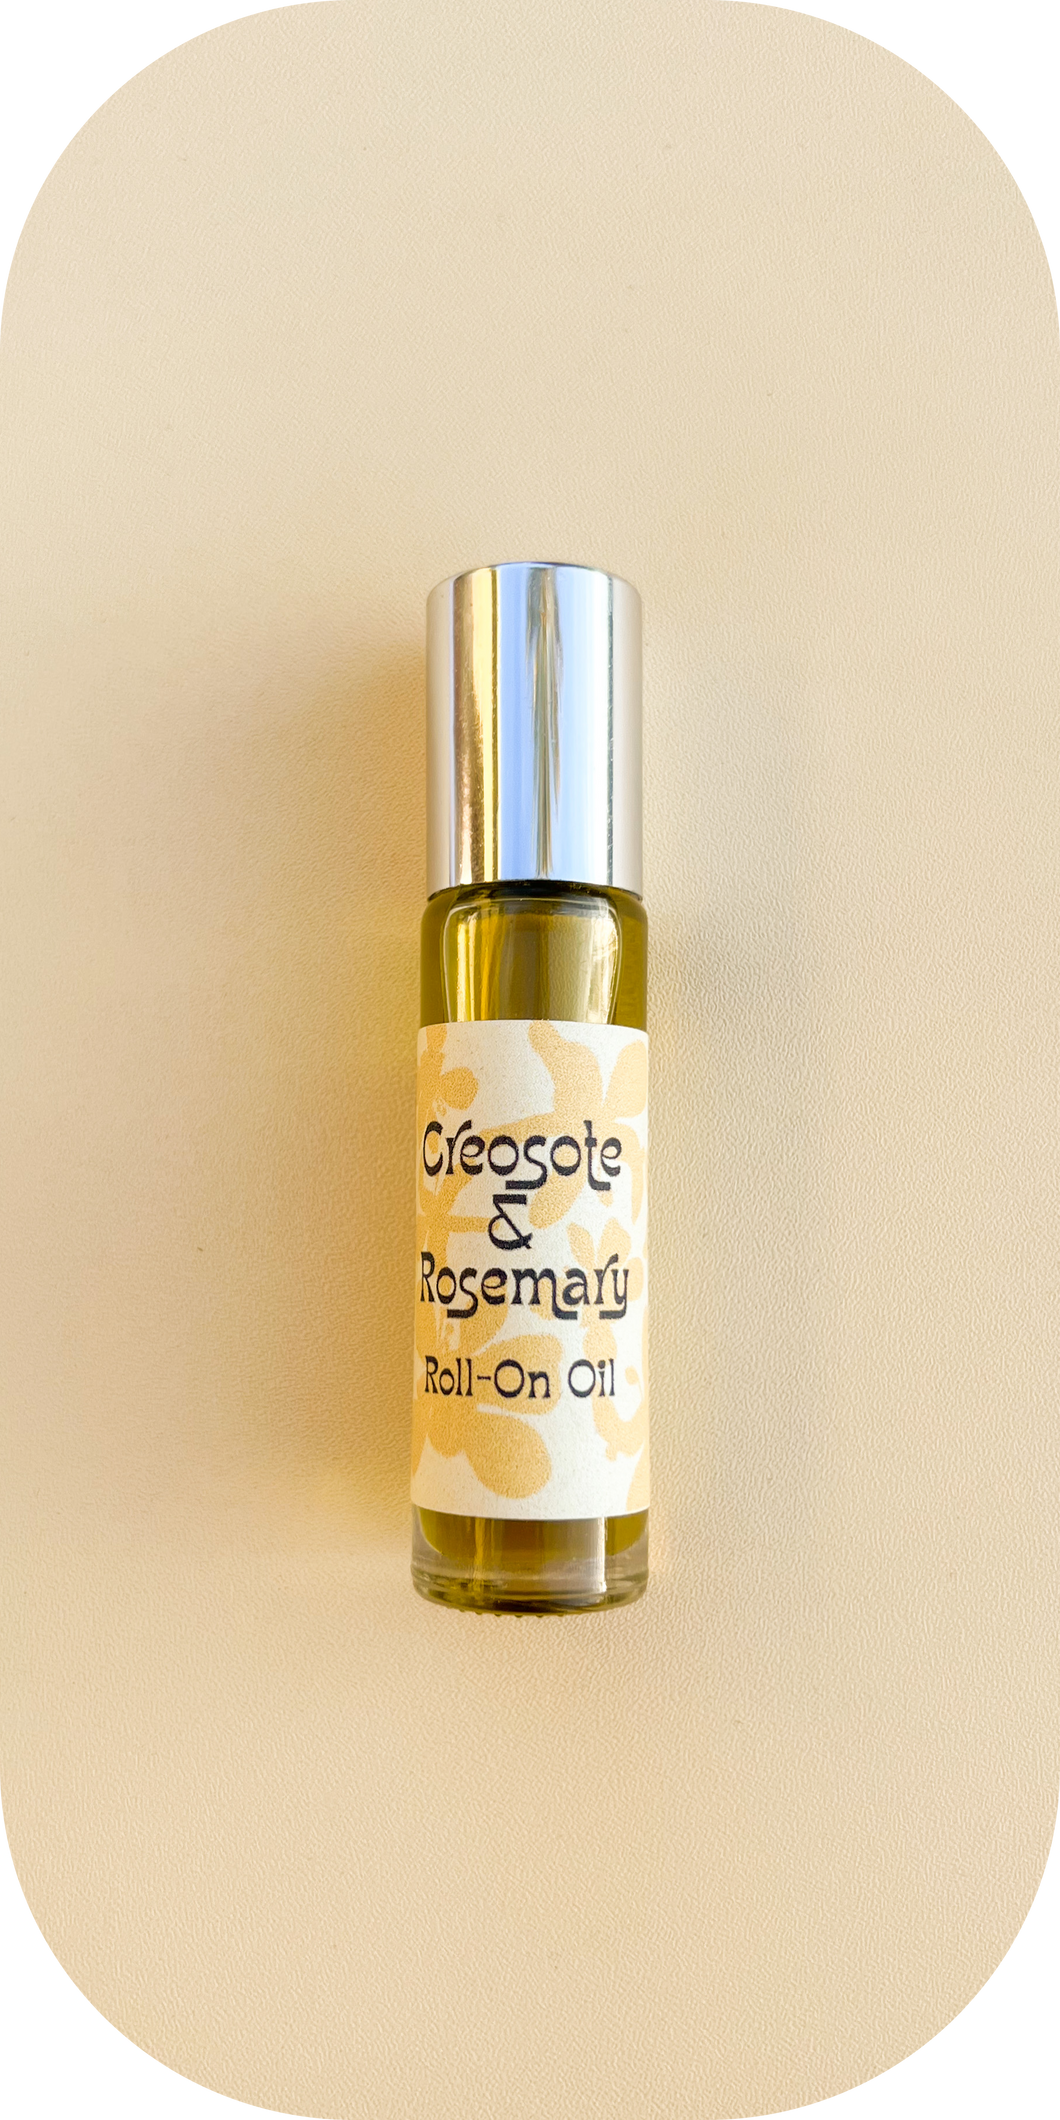 Creosote + Rosemary roll on oil herbal perfume / antiseptic